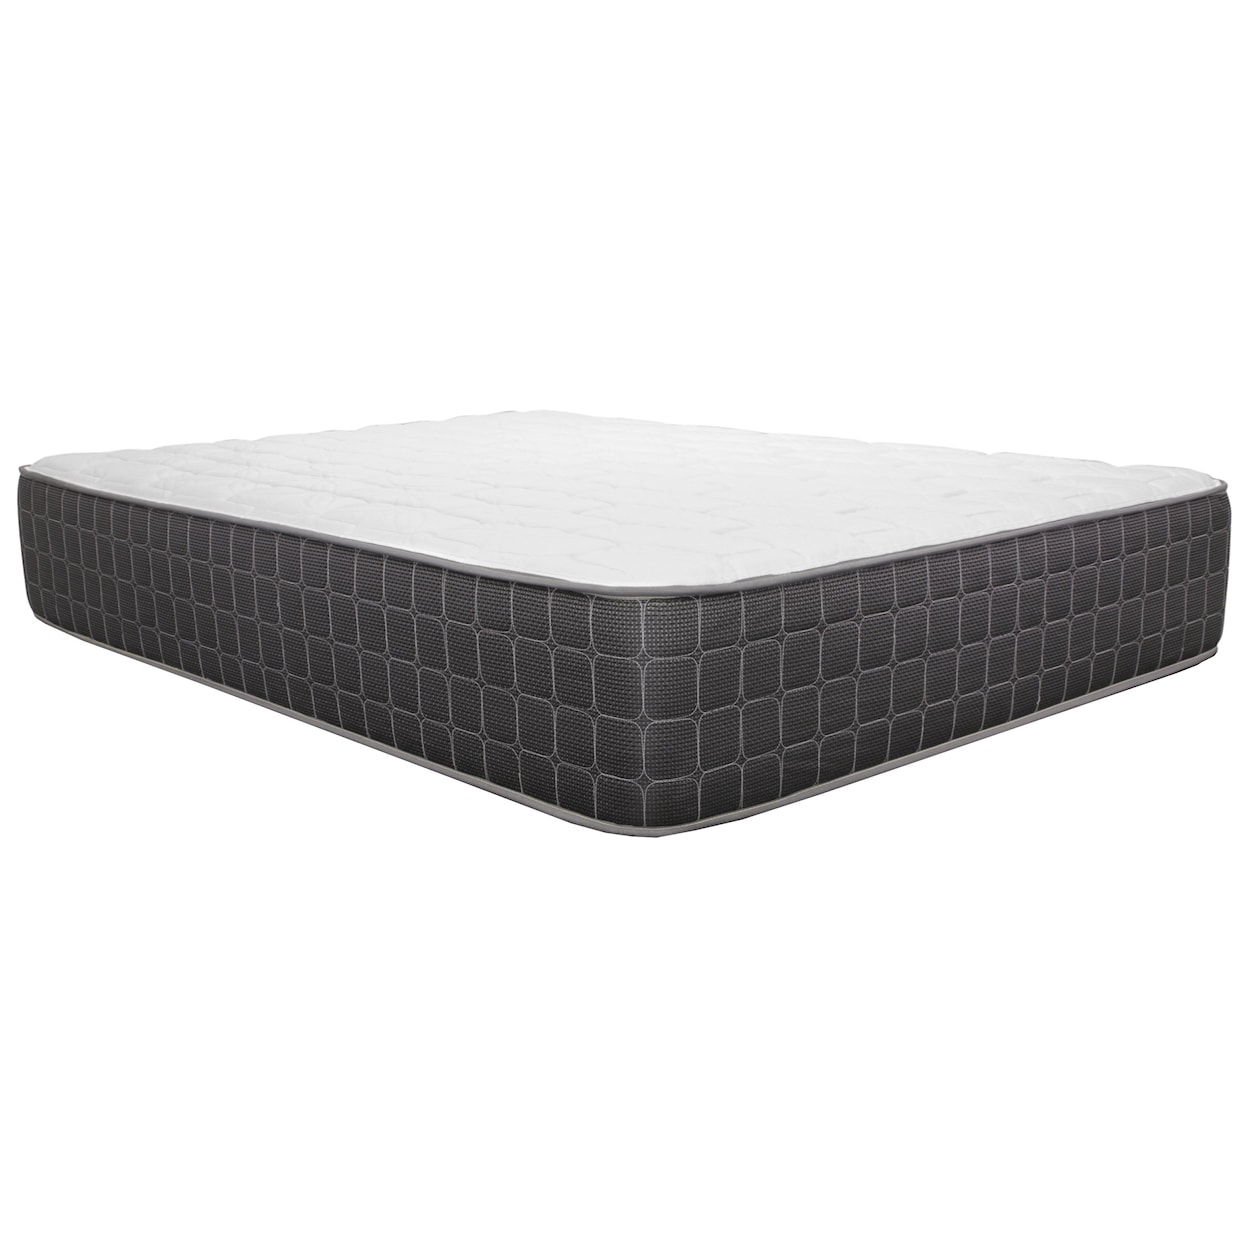 Corsicana 1700 Kingsmere King 13.5" Firm Pocketed Coil Mattress